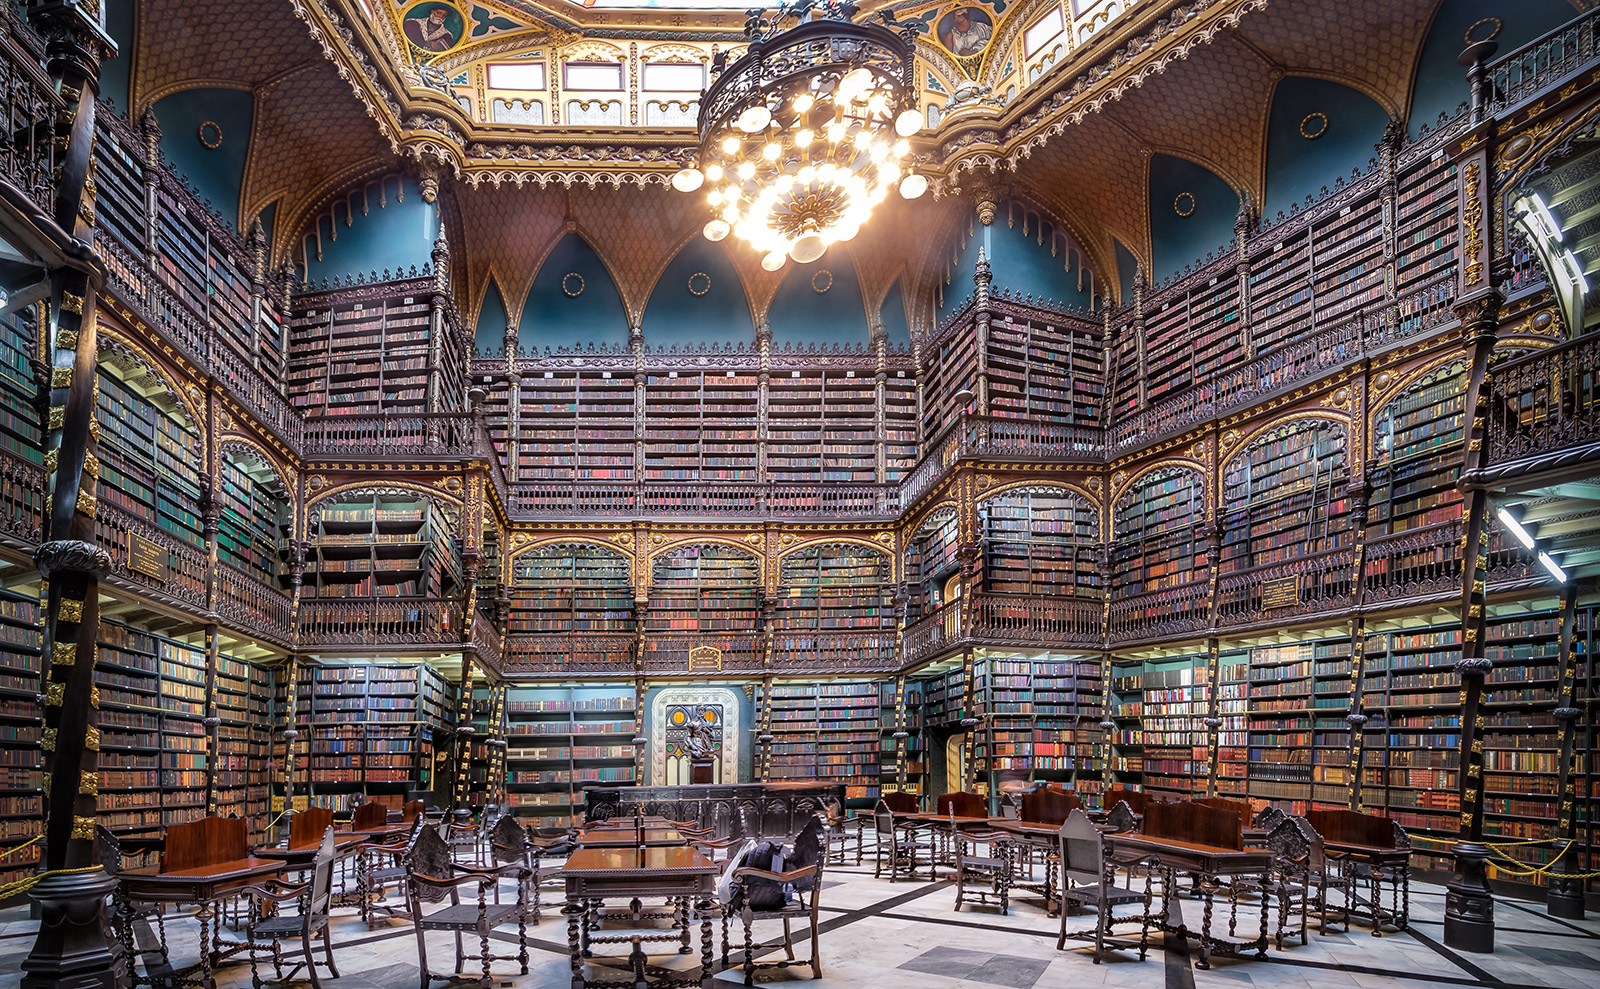 Portuguese reading rooms